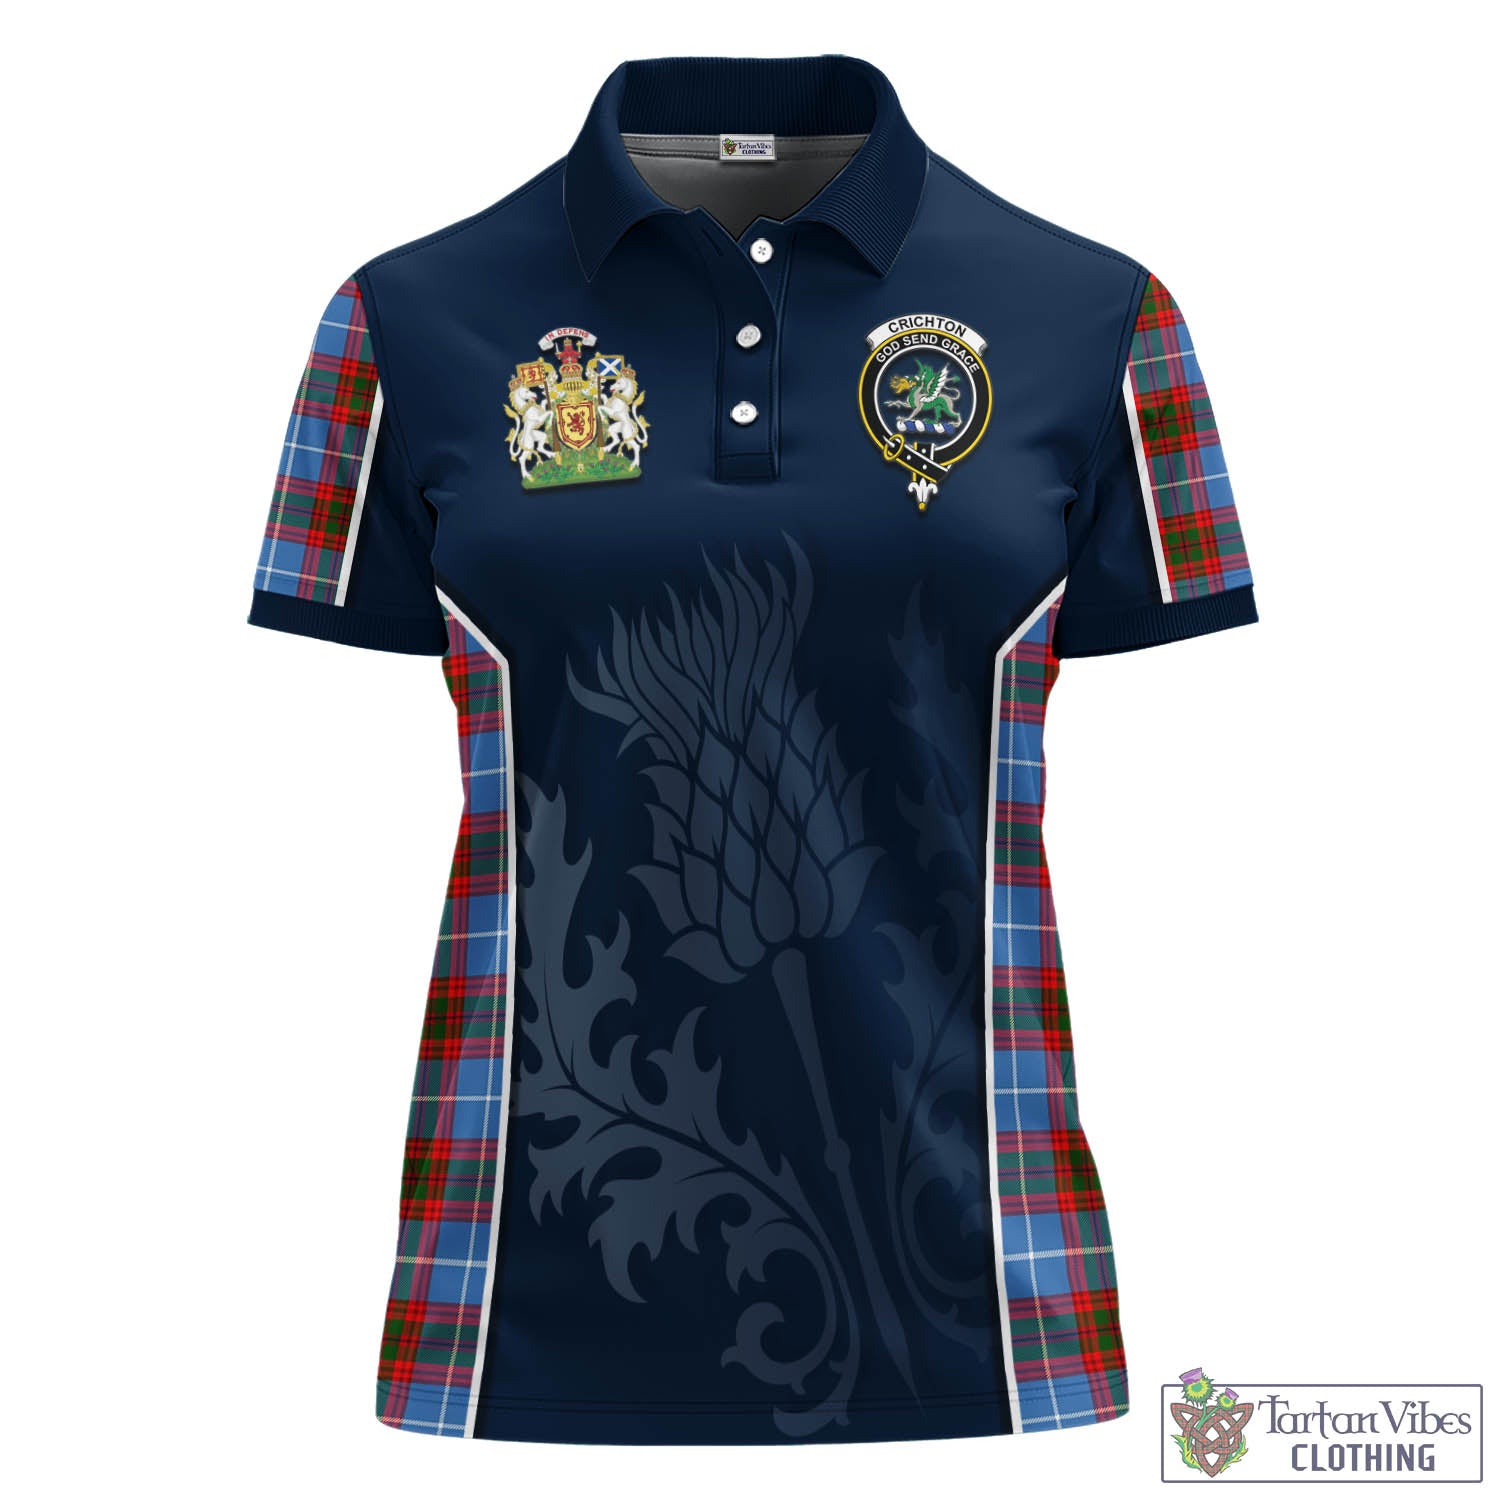 Tartan Vibes Clothing Crichton Tartan Women's Polo Shirt with Family Crest and Scottish Thistle Vibes Sport Style